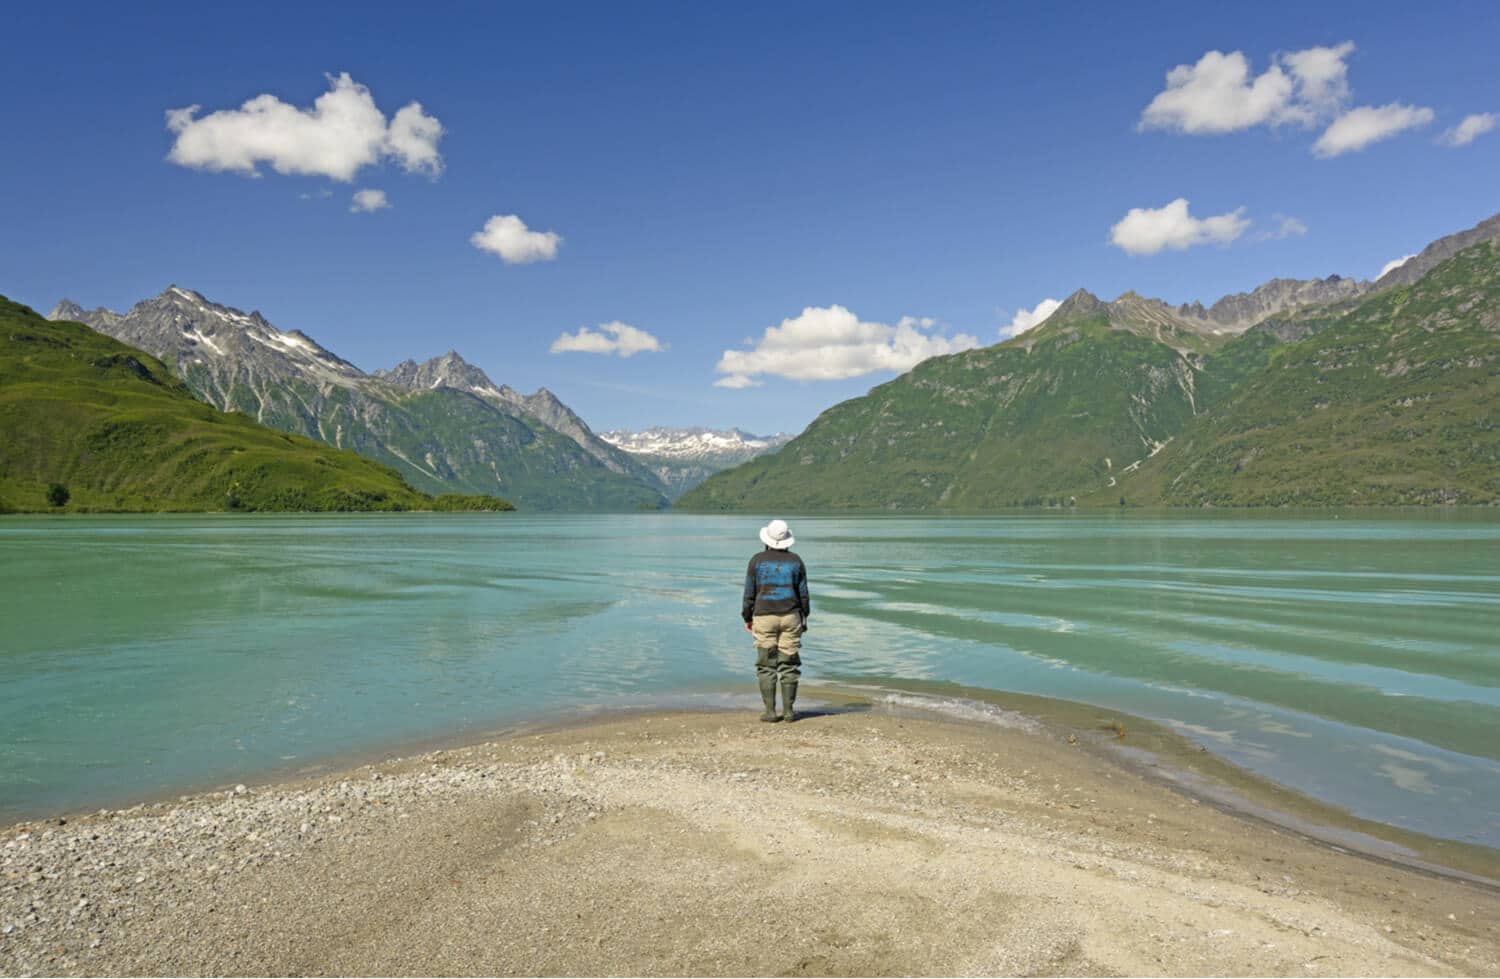 Camper with wading boots stares out on a lake surrounded by mountains.